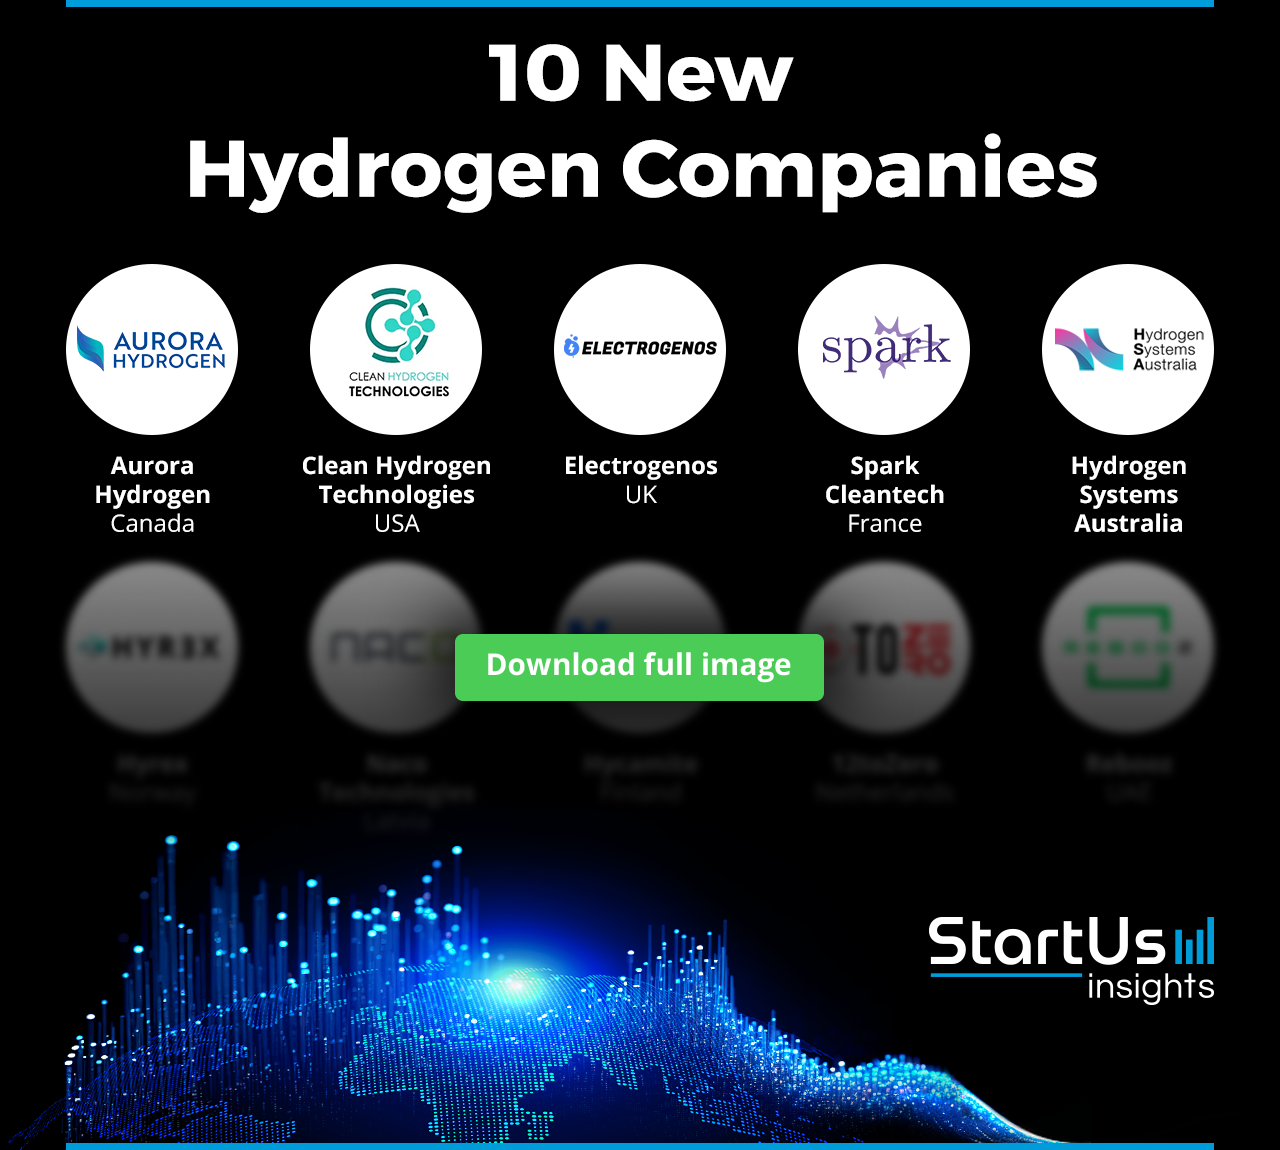 New-Hydrogen-Companies-Logos-Blurred-StartUs-Insights-noresize